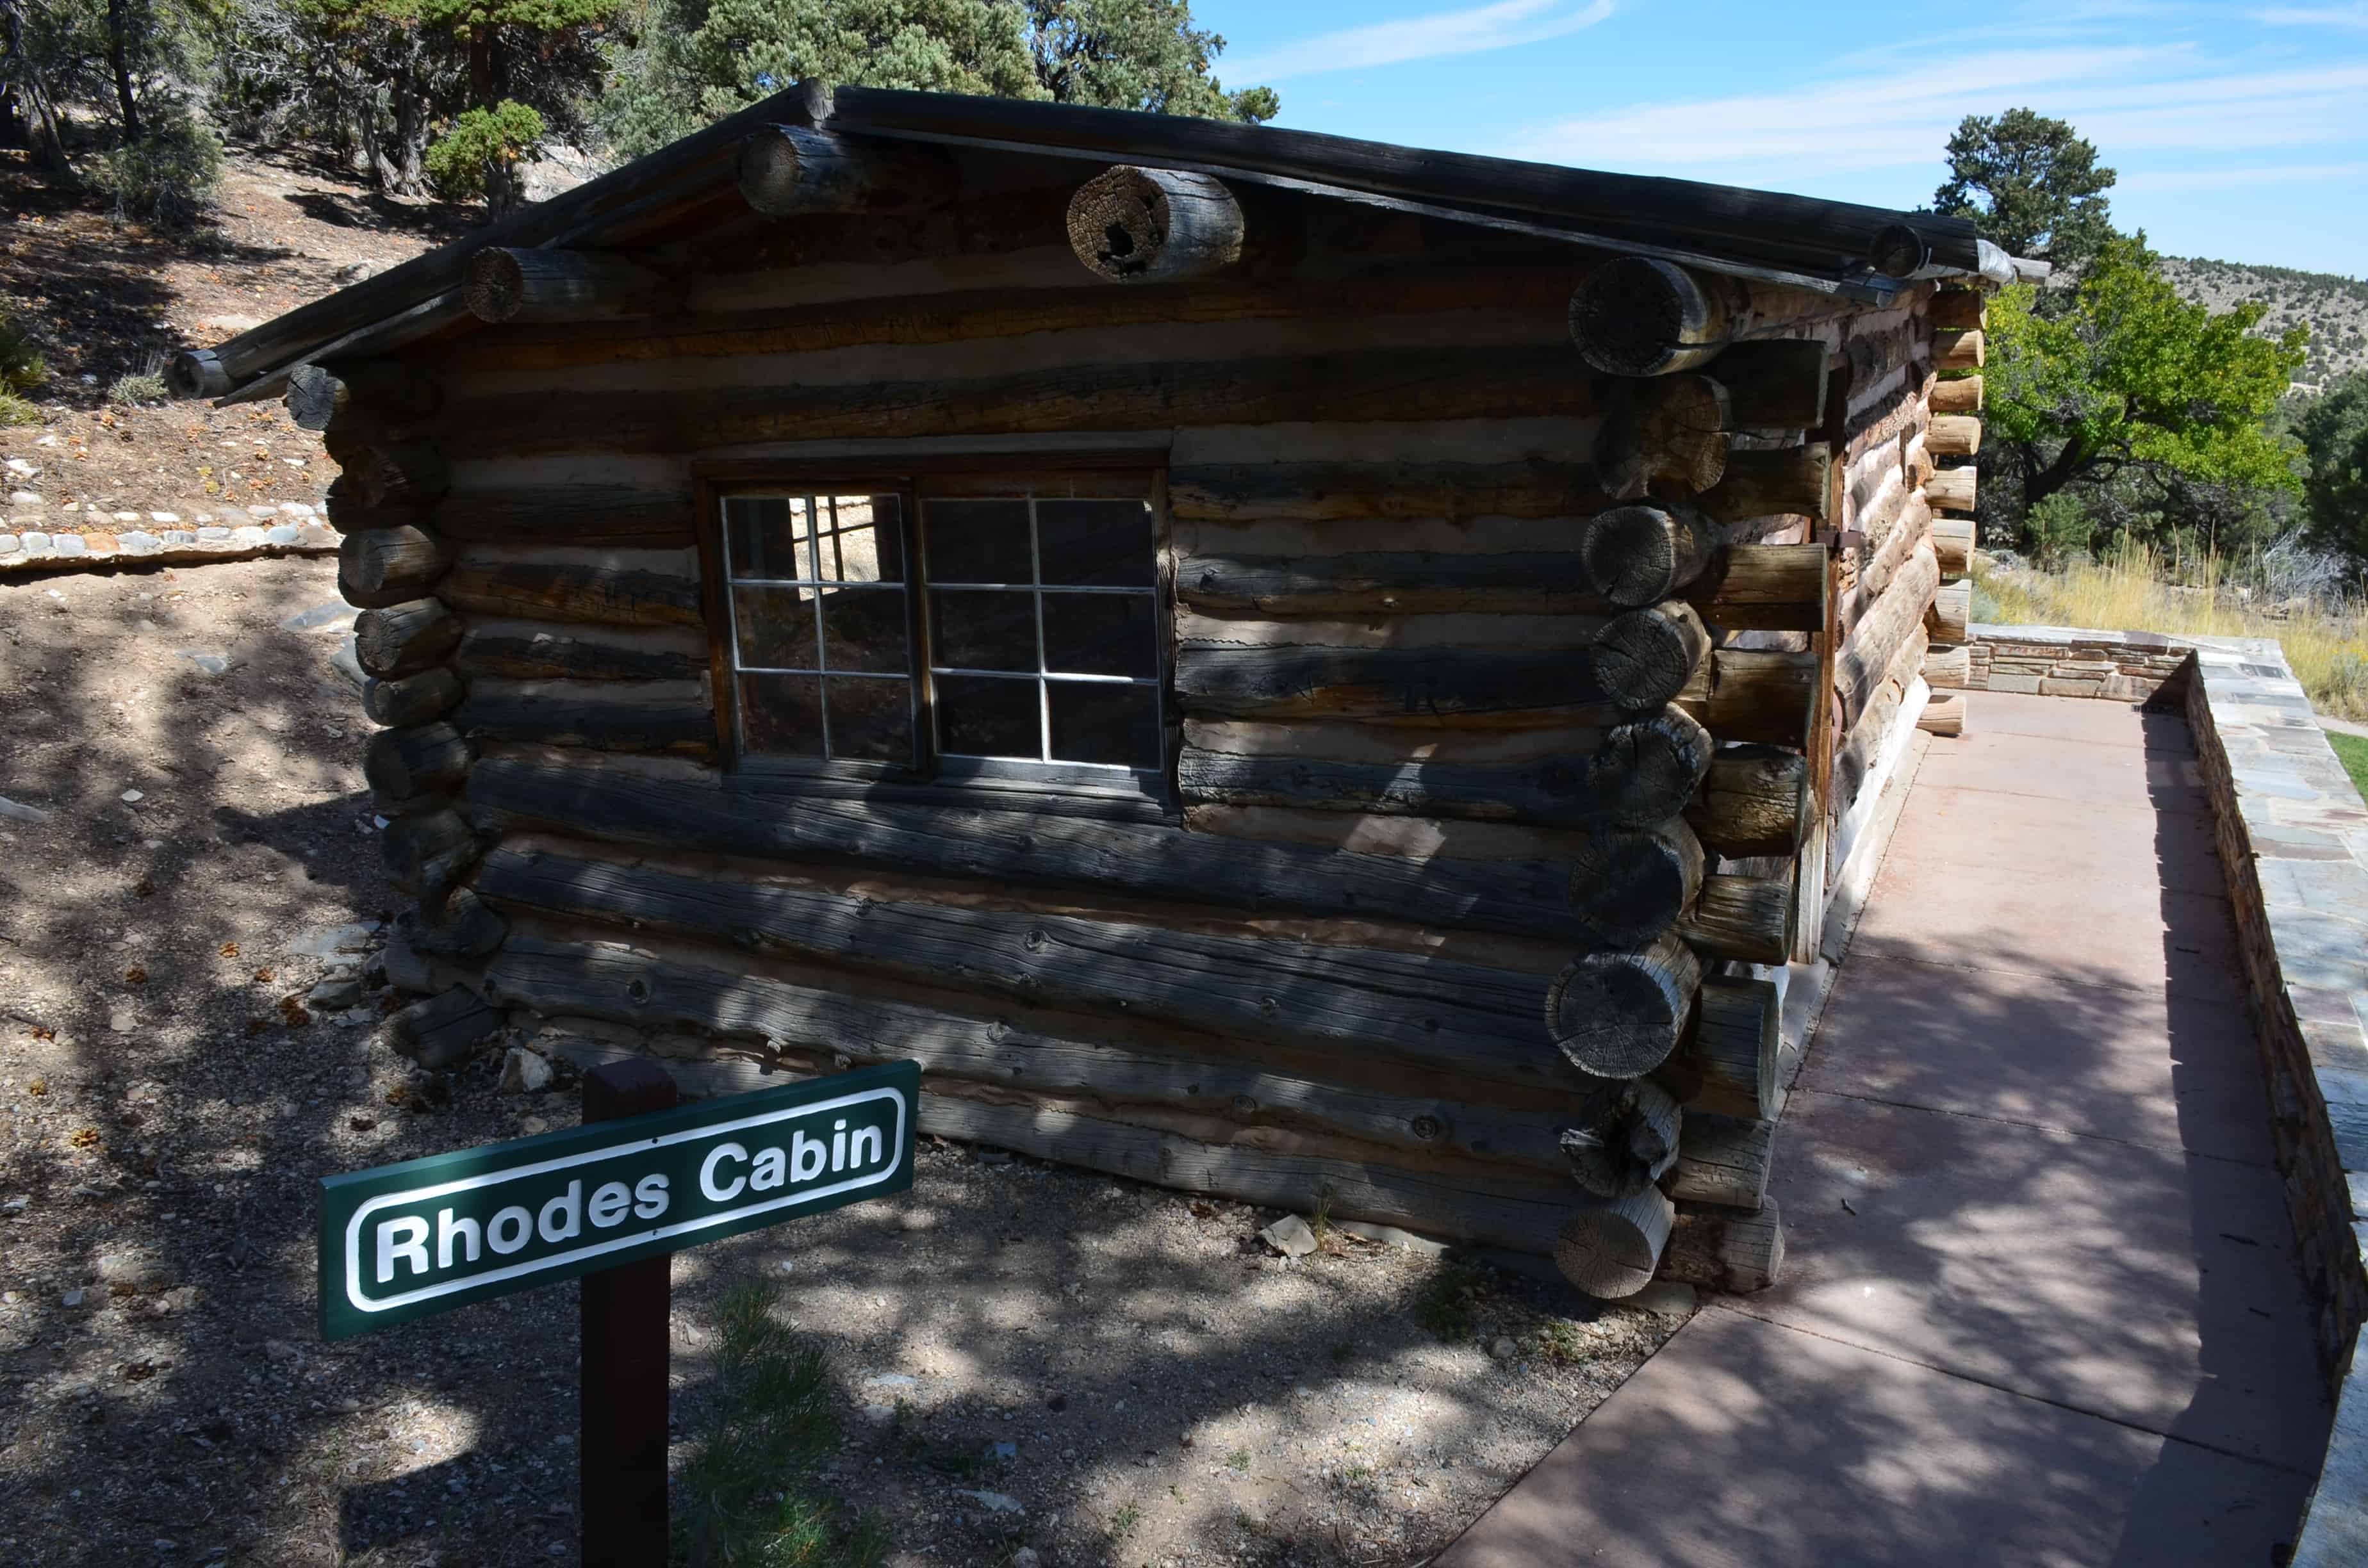 Rhodes Cabin on the Mountain View Nature Trail at Great Basin National Park, Nevada